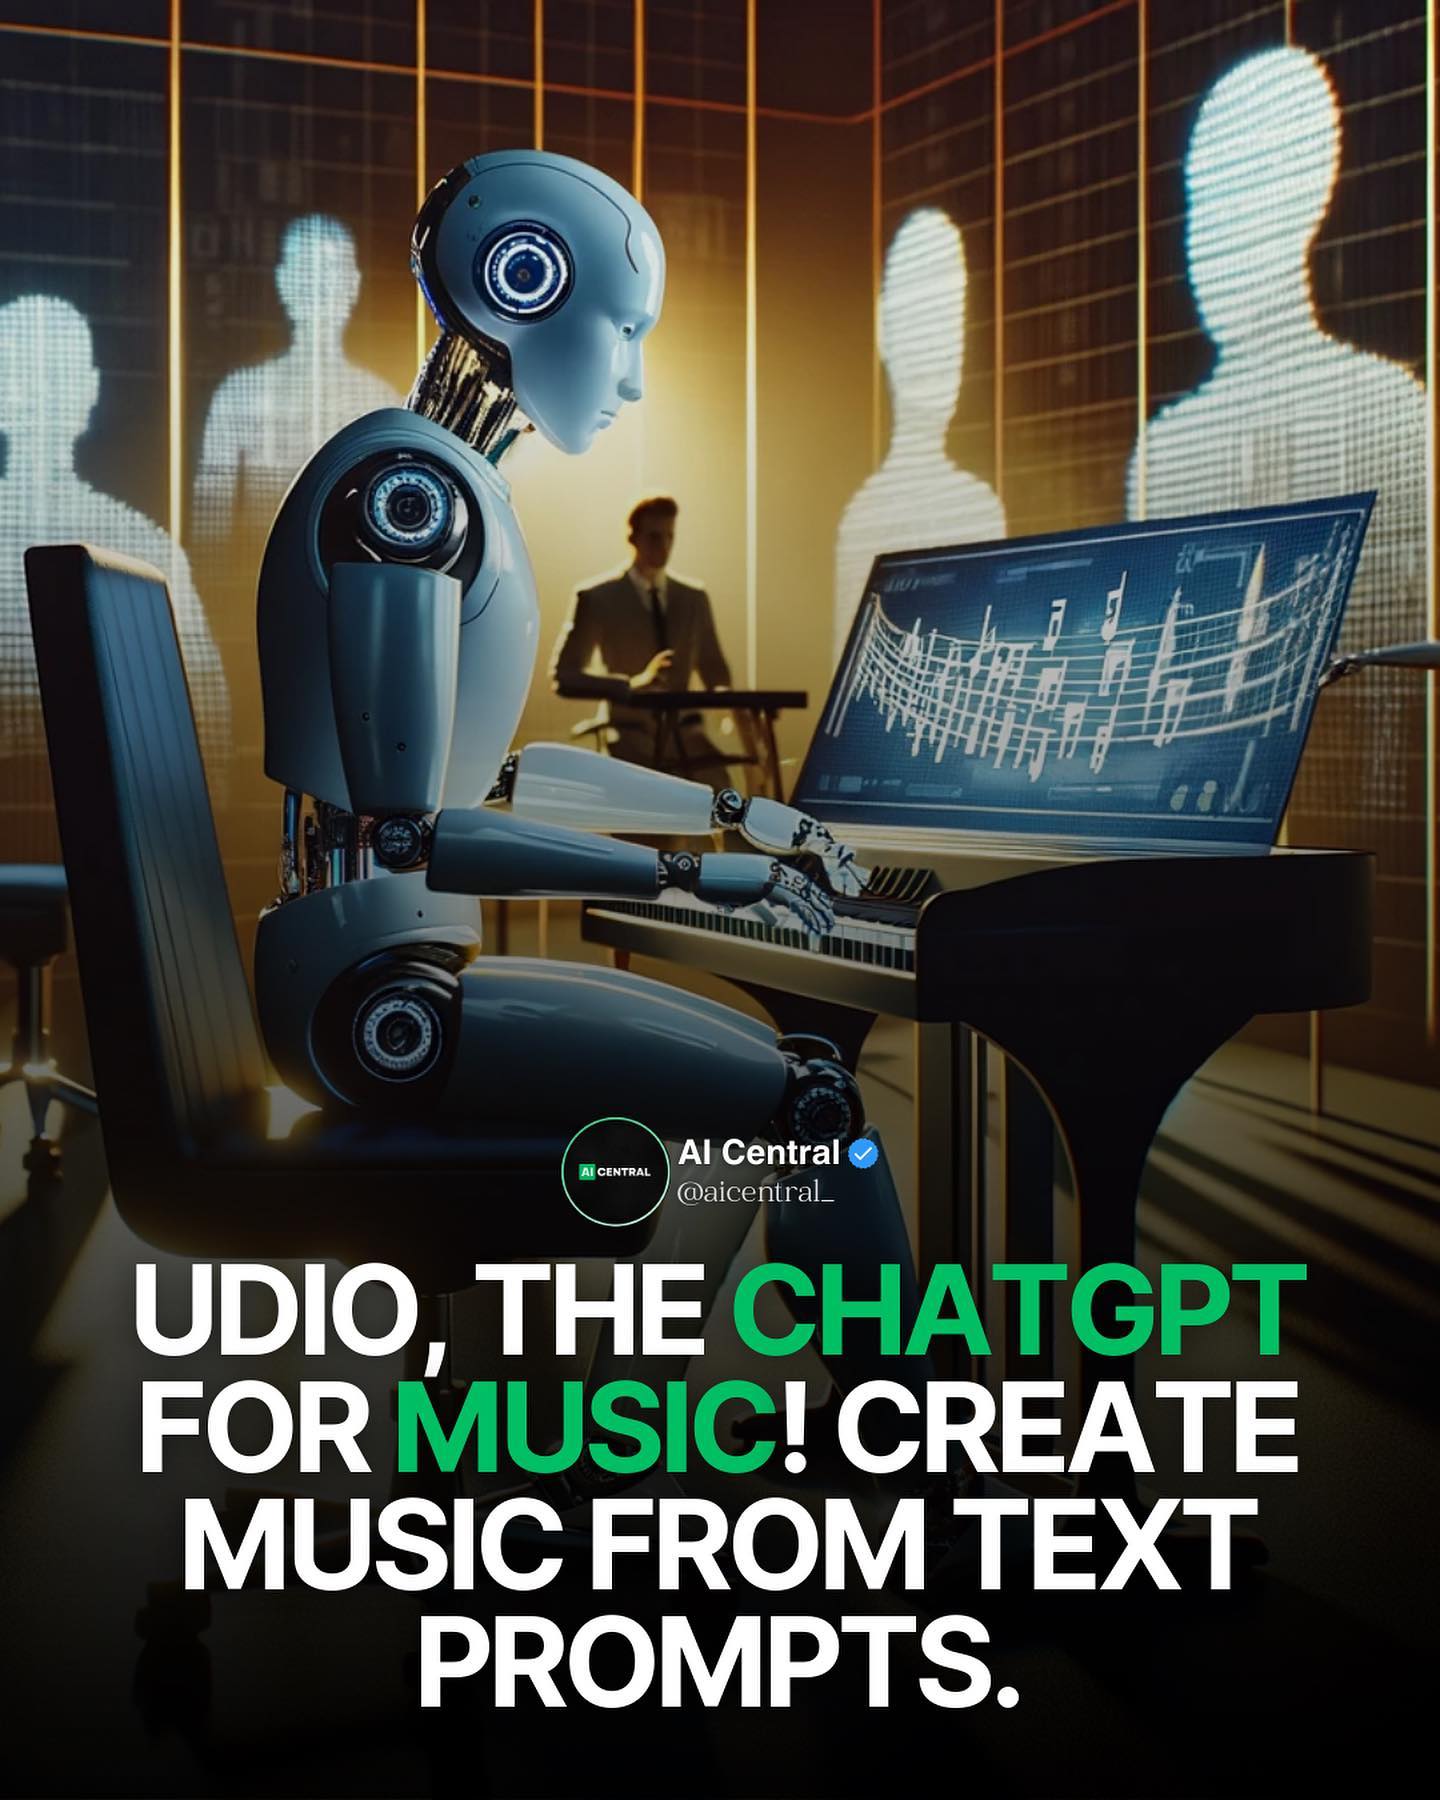 Udio, a new app designed to create customized songs based on the text you provid-437724501_341474392242372_3614744481331861614_n 